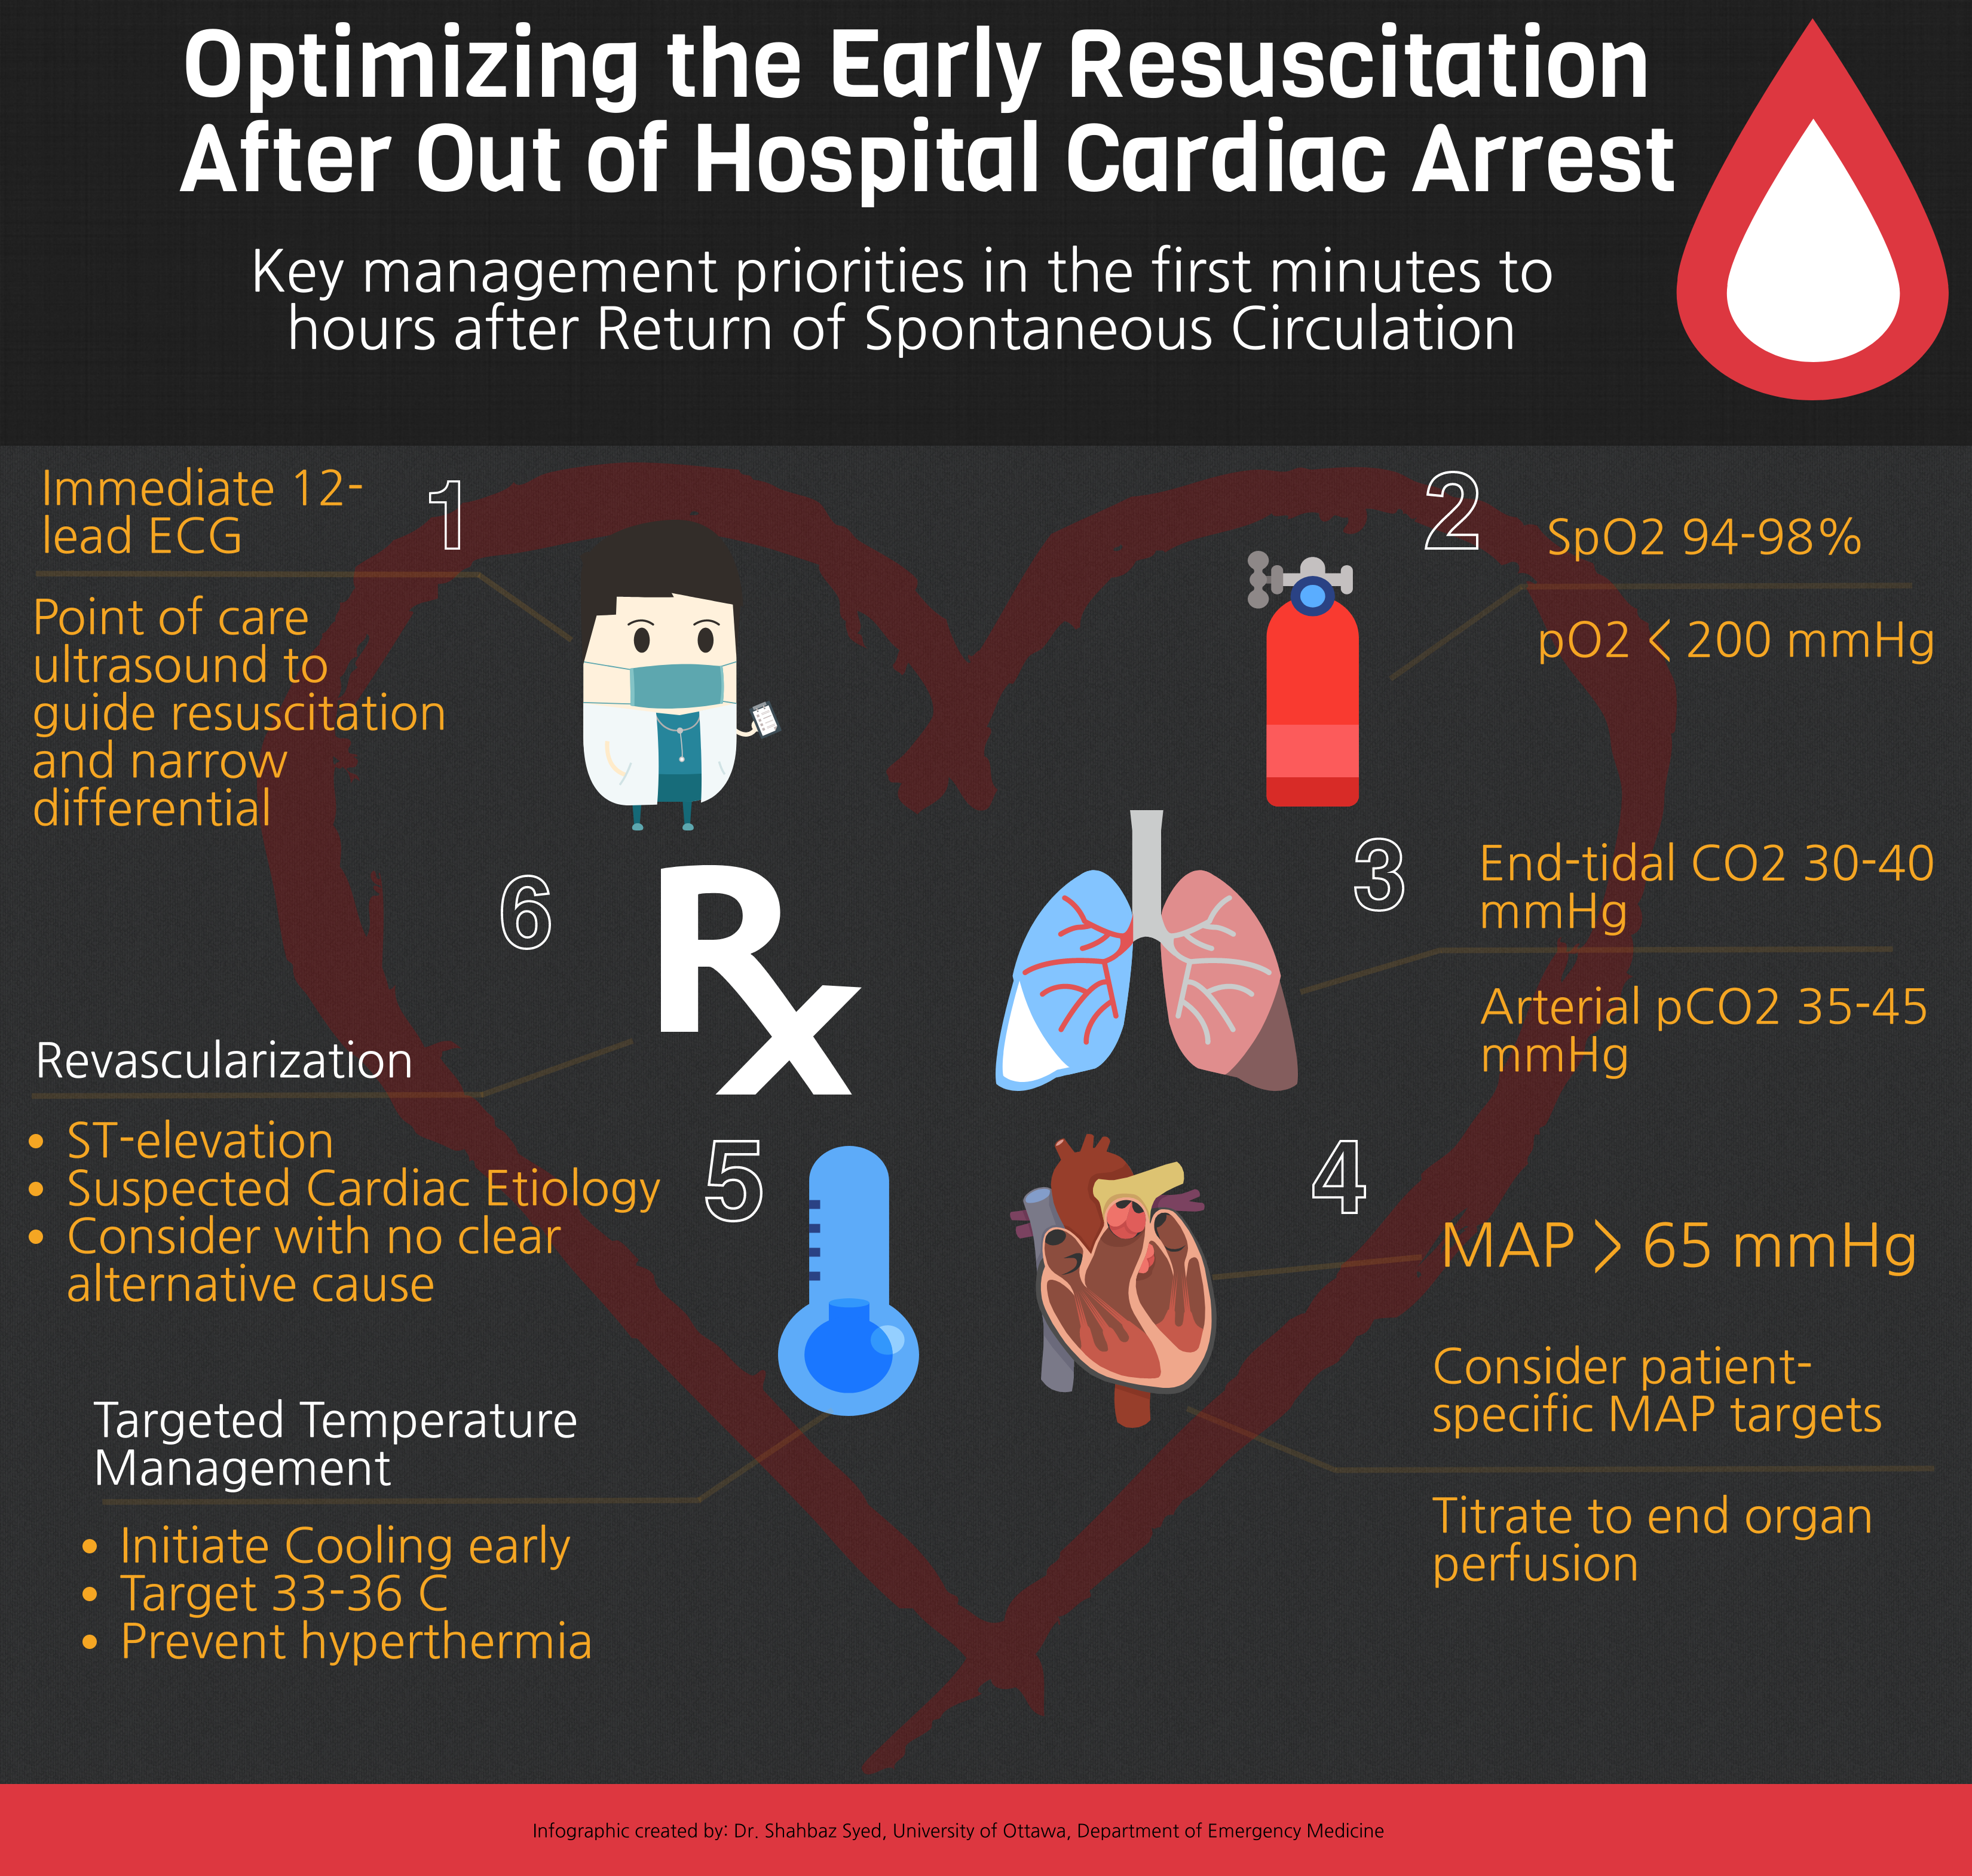 Optimizing the Early Resuscitation After Out of Hospital Cardiac Arrest